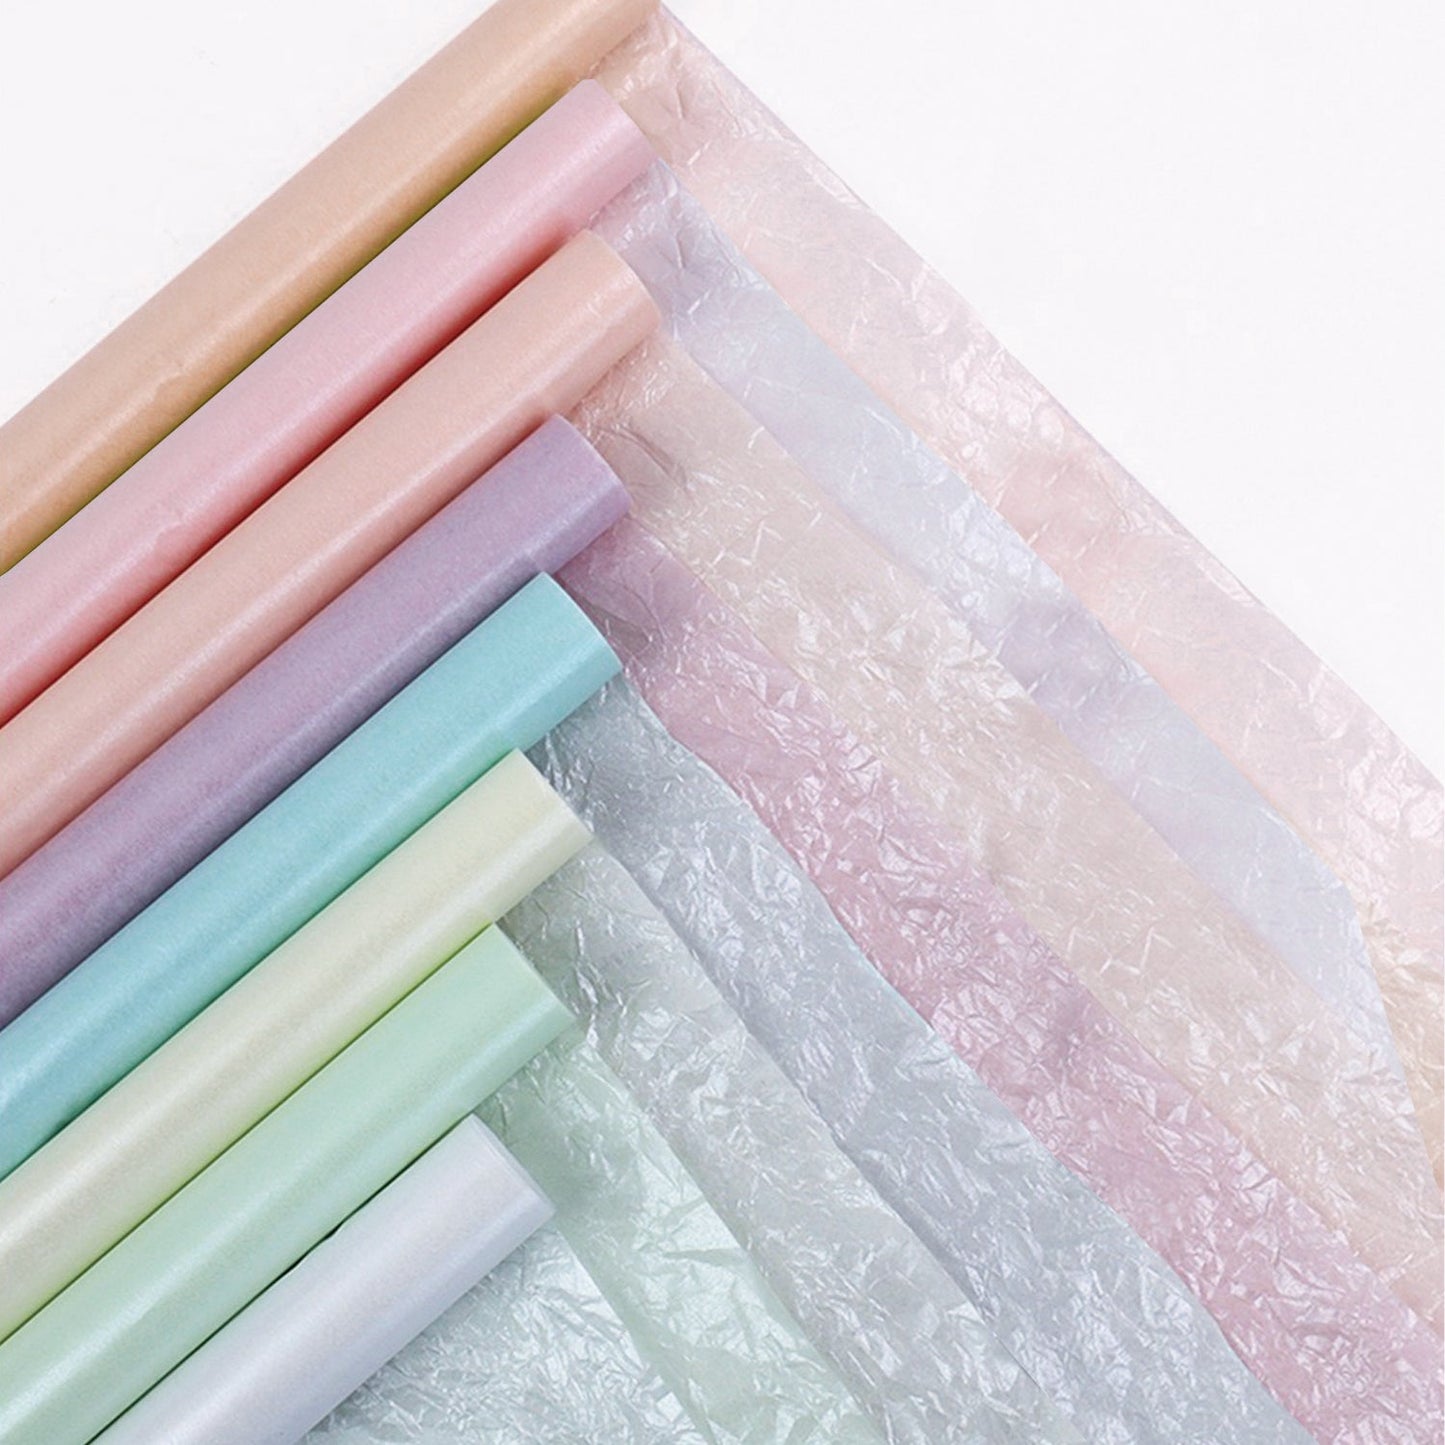 100sheets Light Blue 19.7x27.6 inches Pearlized Tissue Paper; $0.26/pc